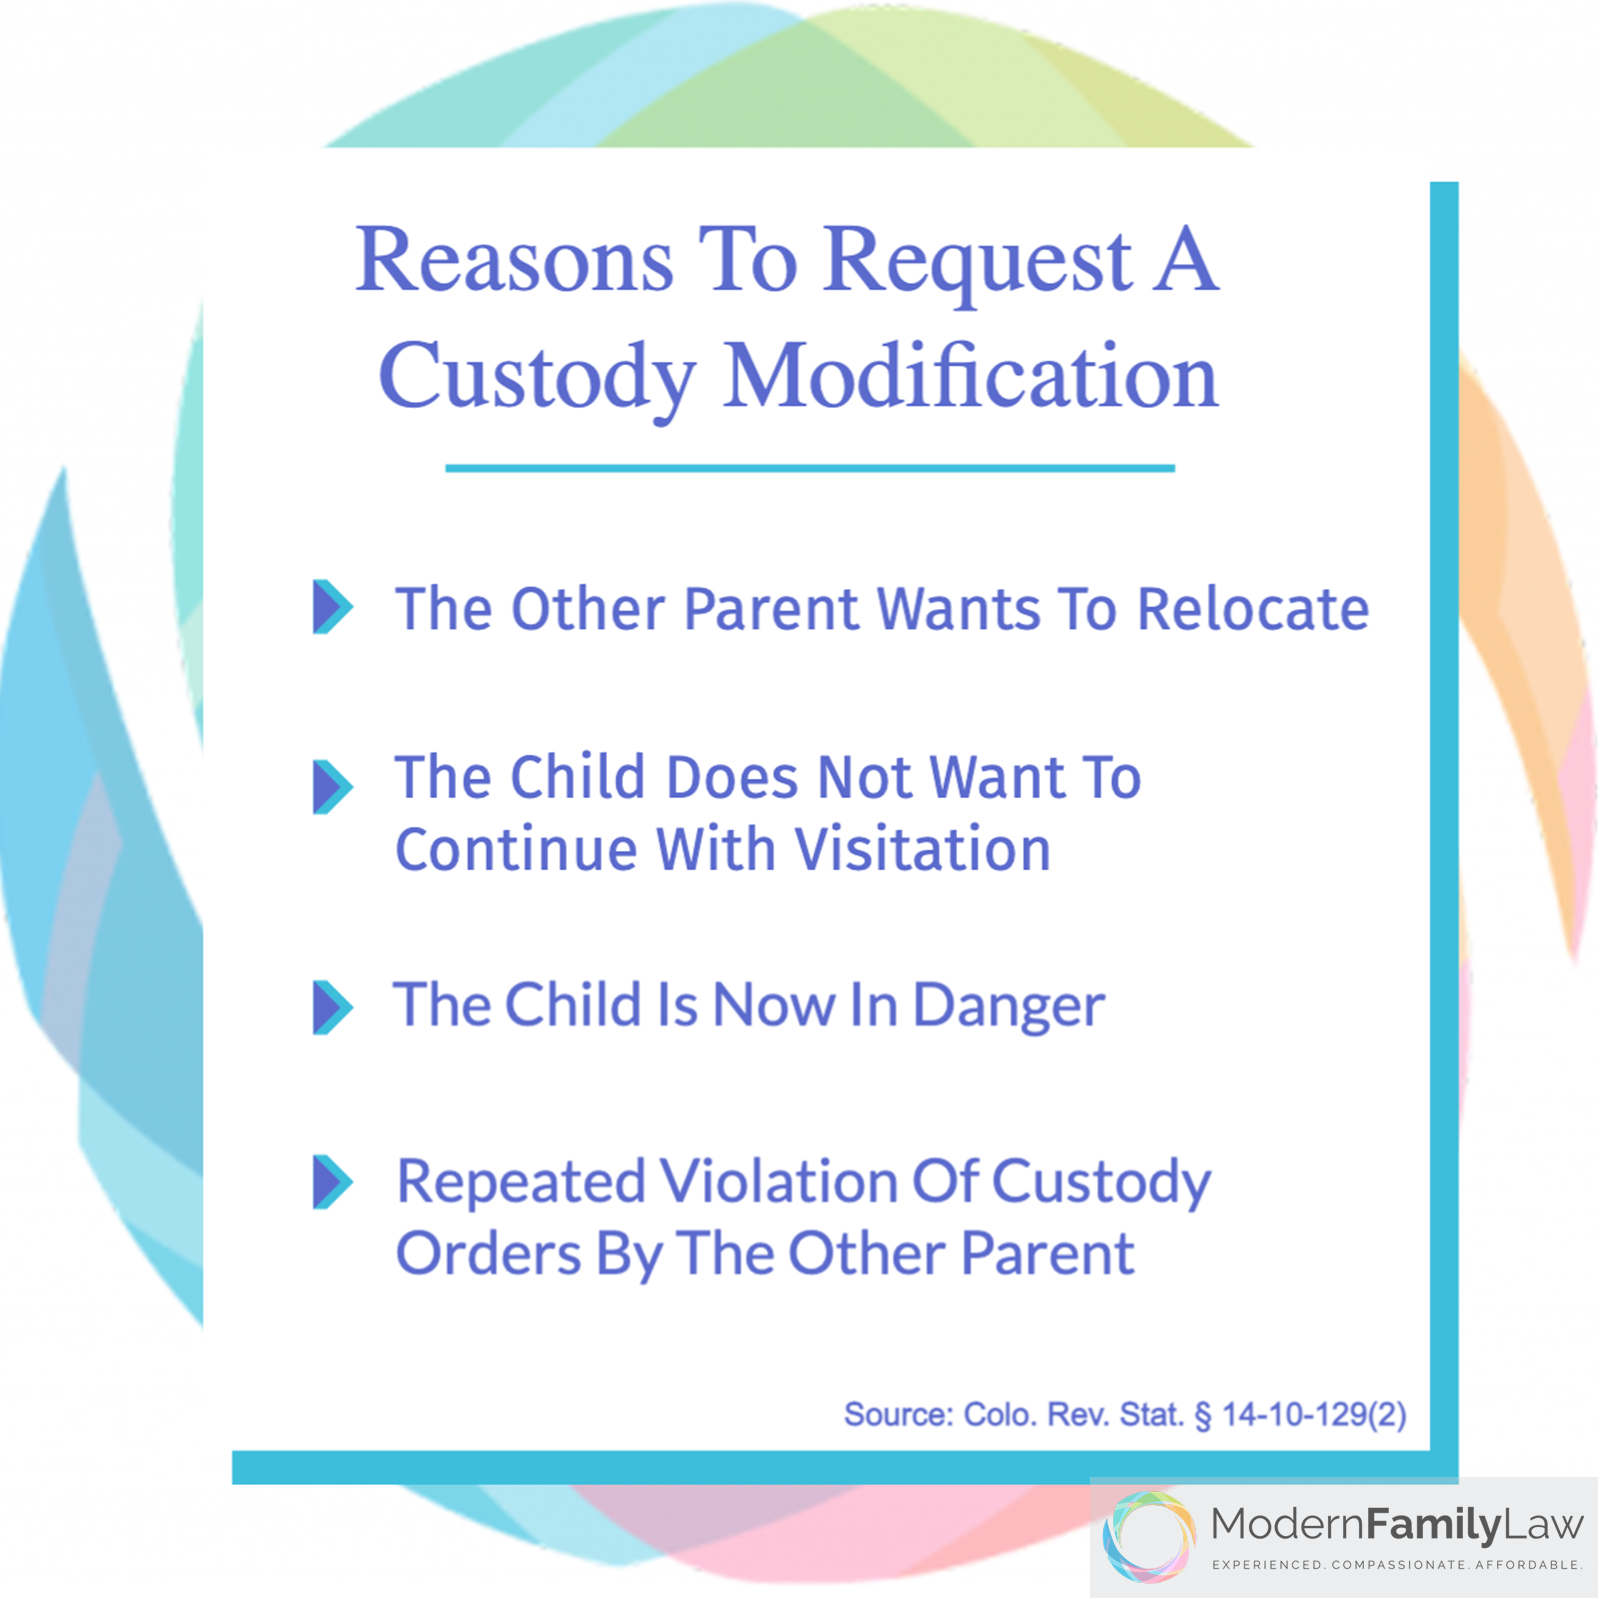 Reasons for requesting a custody modification